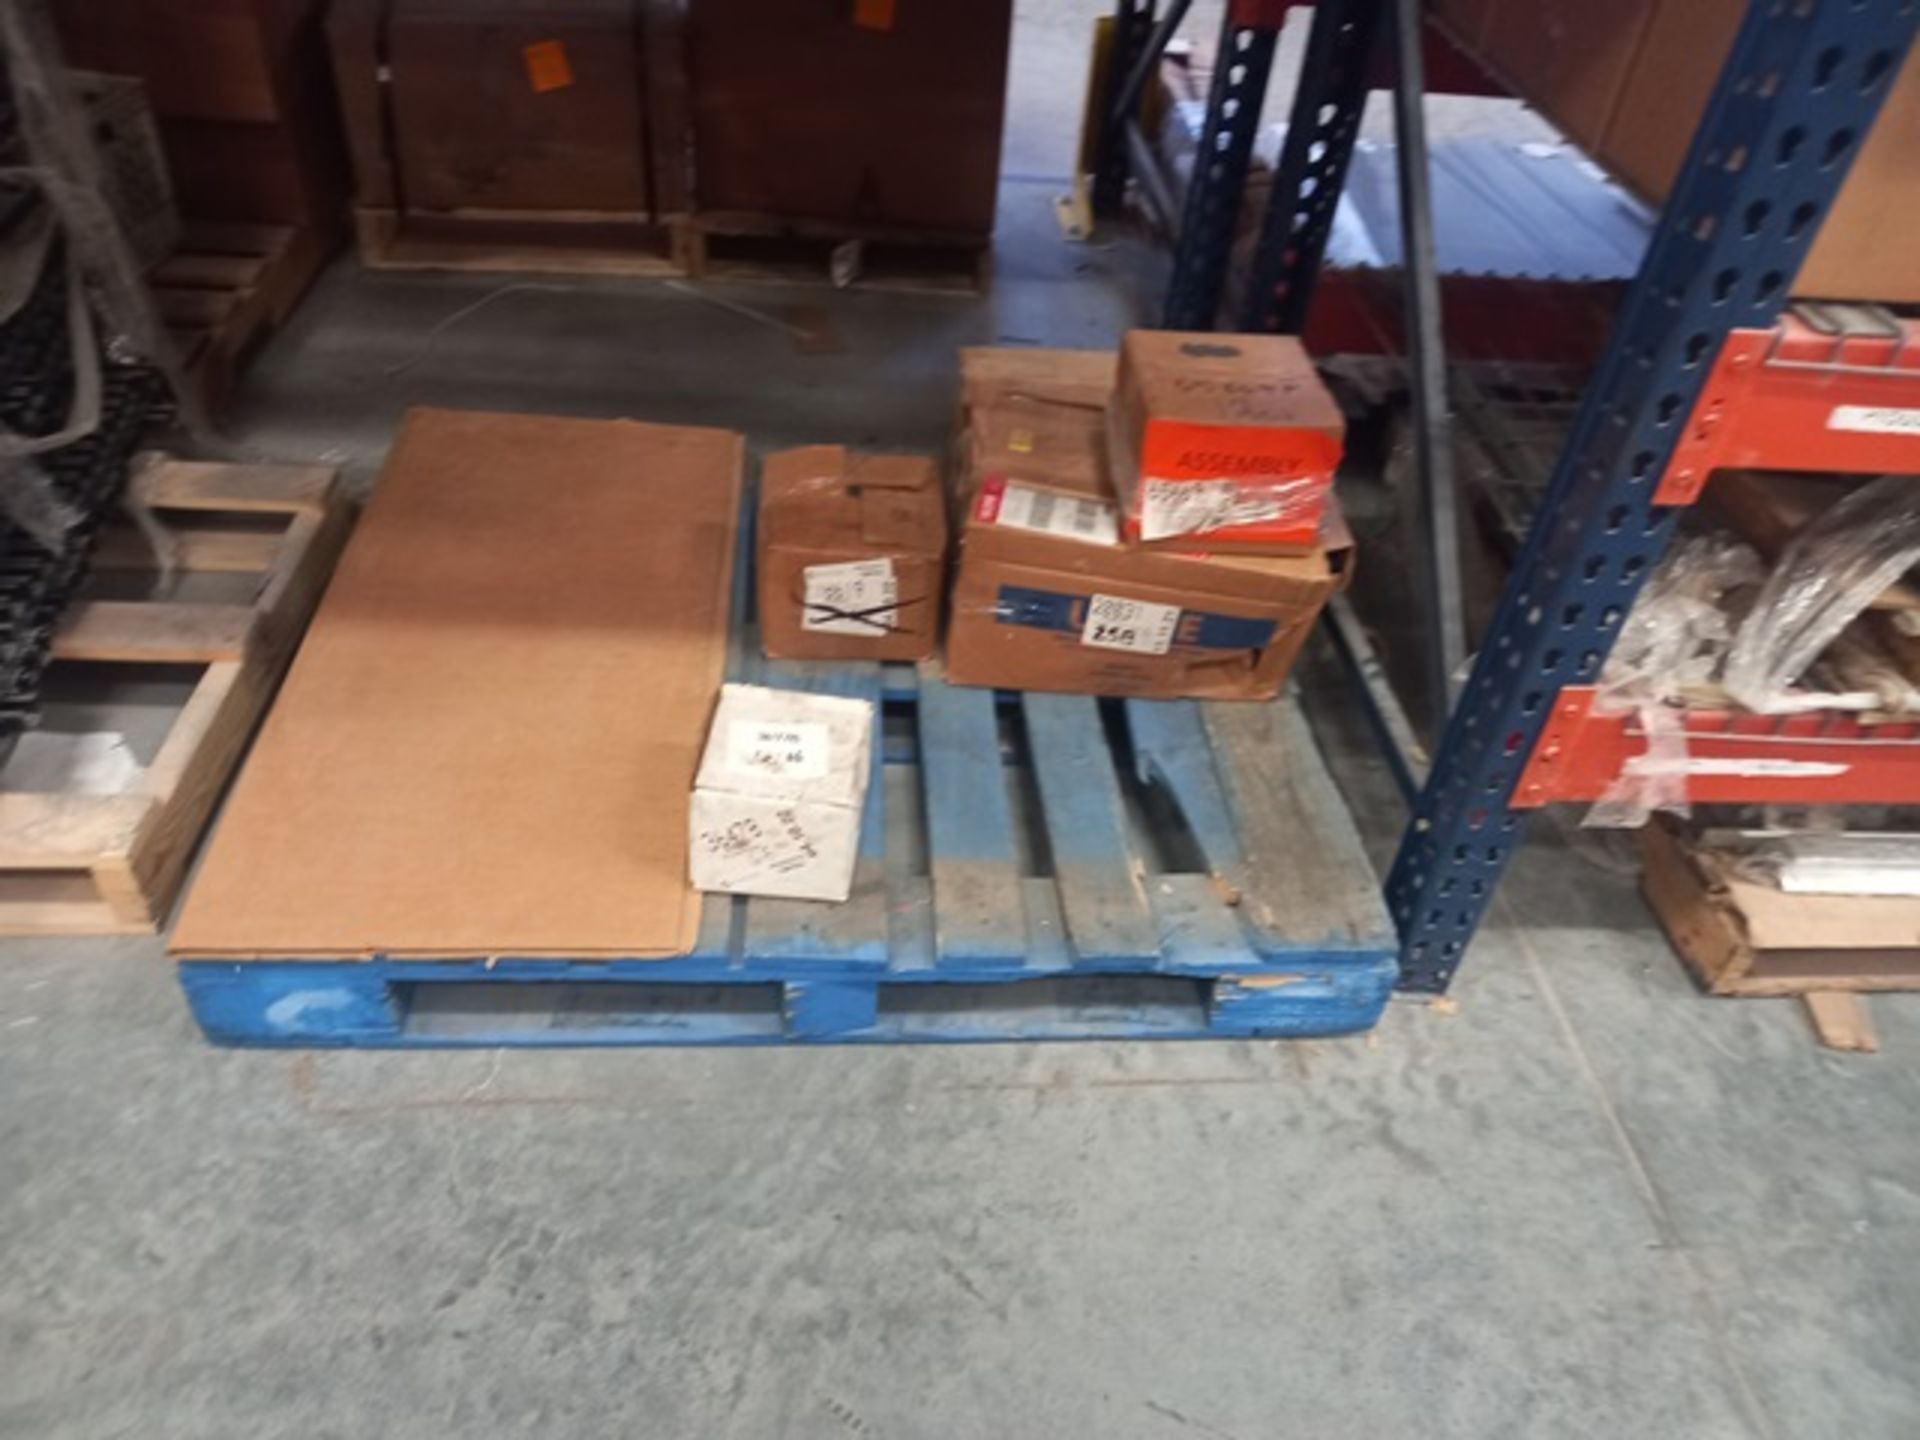 LOT: Miscellaneous Materials: Approximately (84,000) Pieces Of Materials For The Manufacture Of - Image 13 of 54